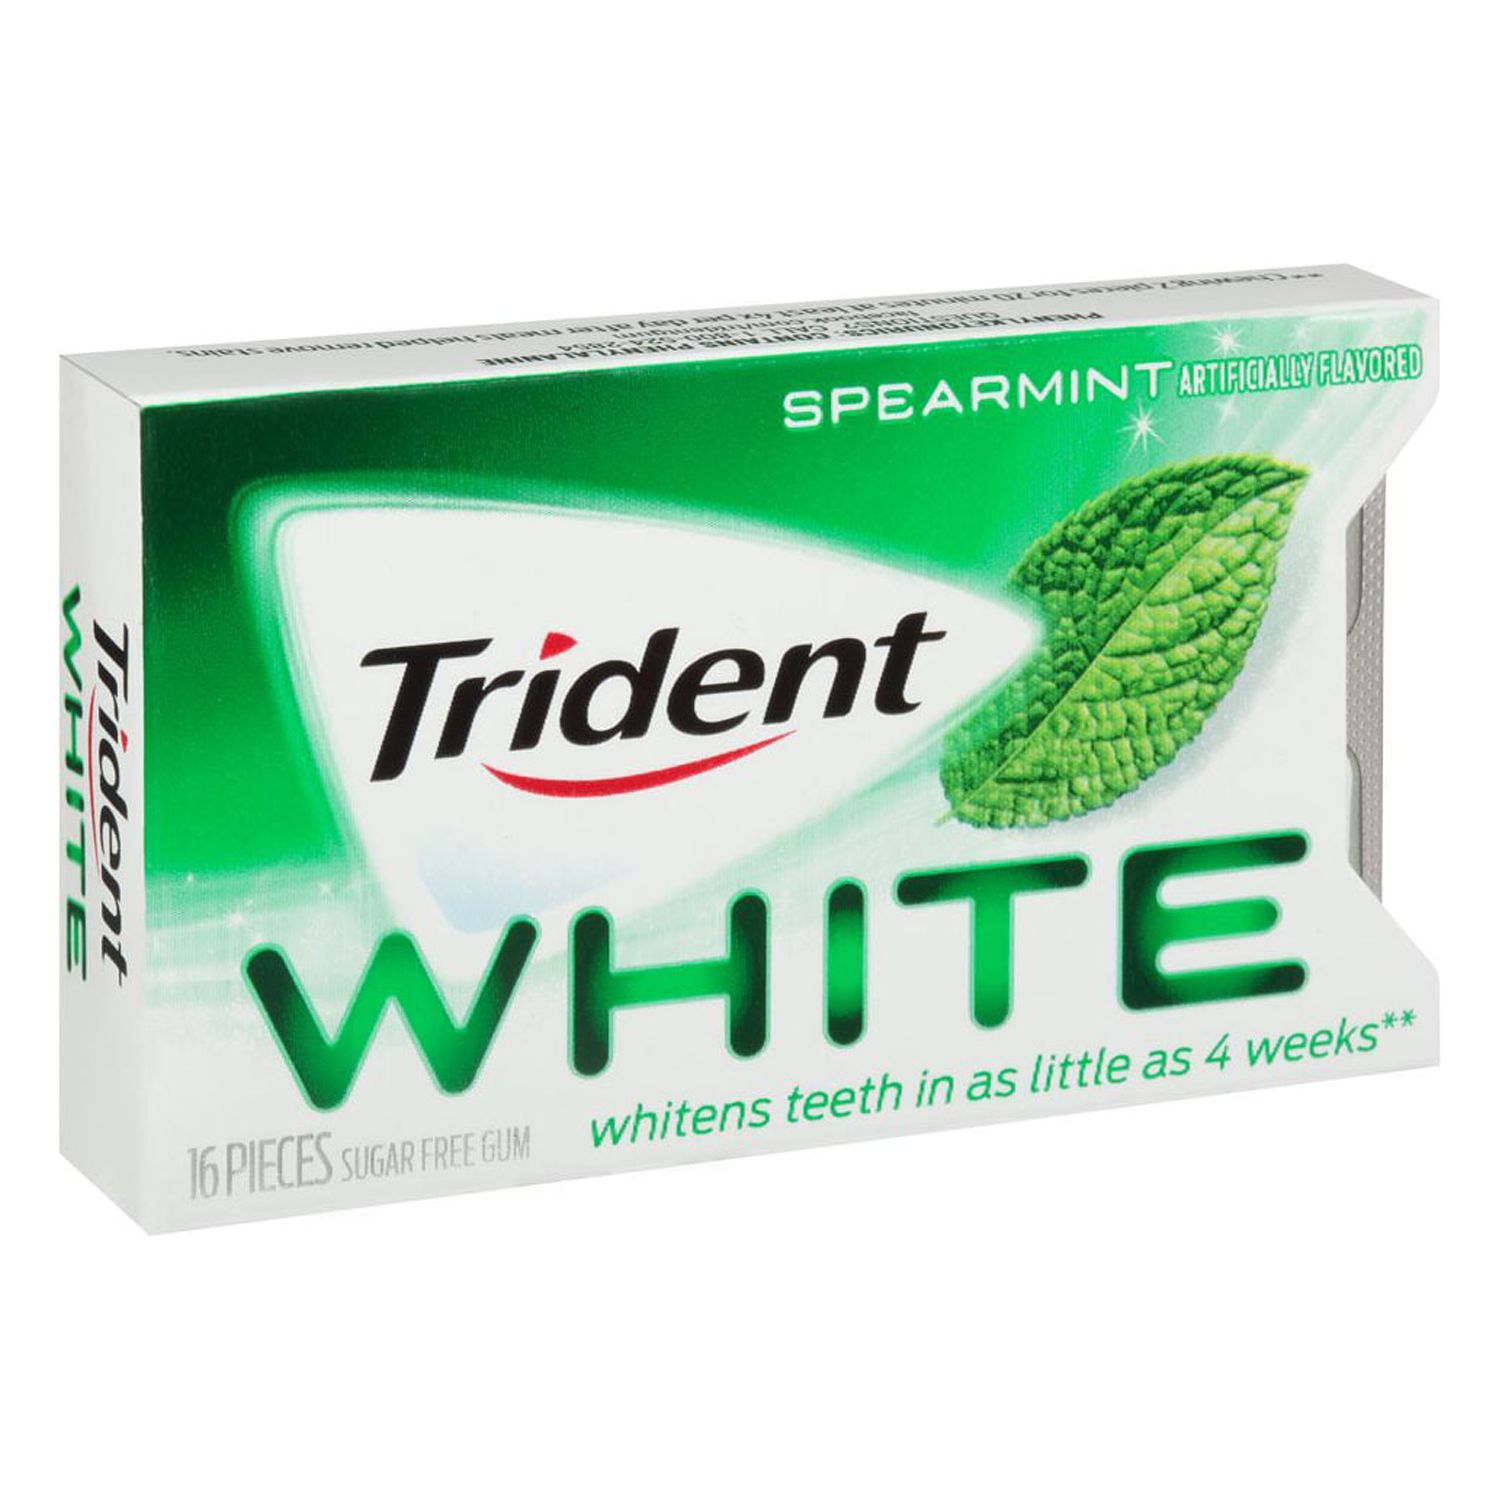 Trident White Dual Pack Sugar Free Gum Spearmint Artificially Flavored - 12 Pack - image 2 of 3